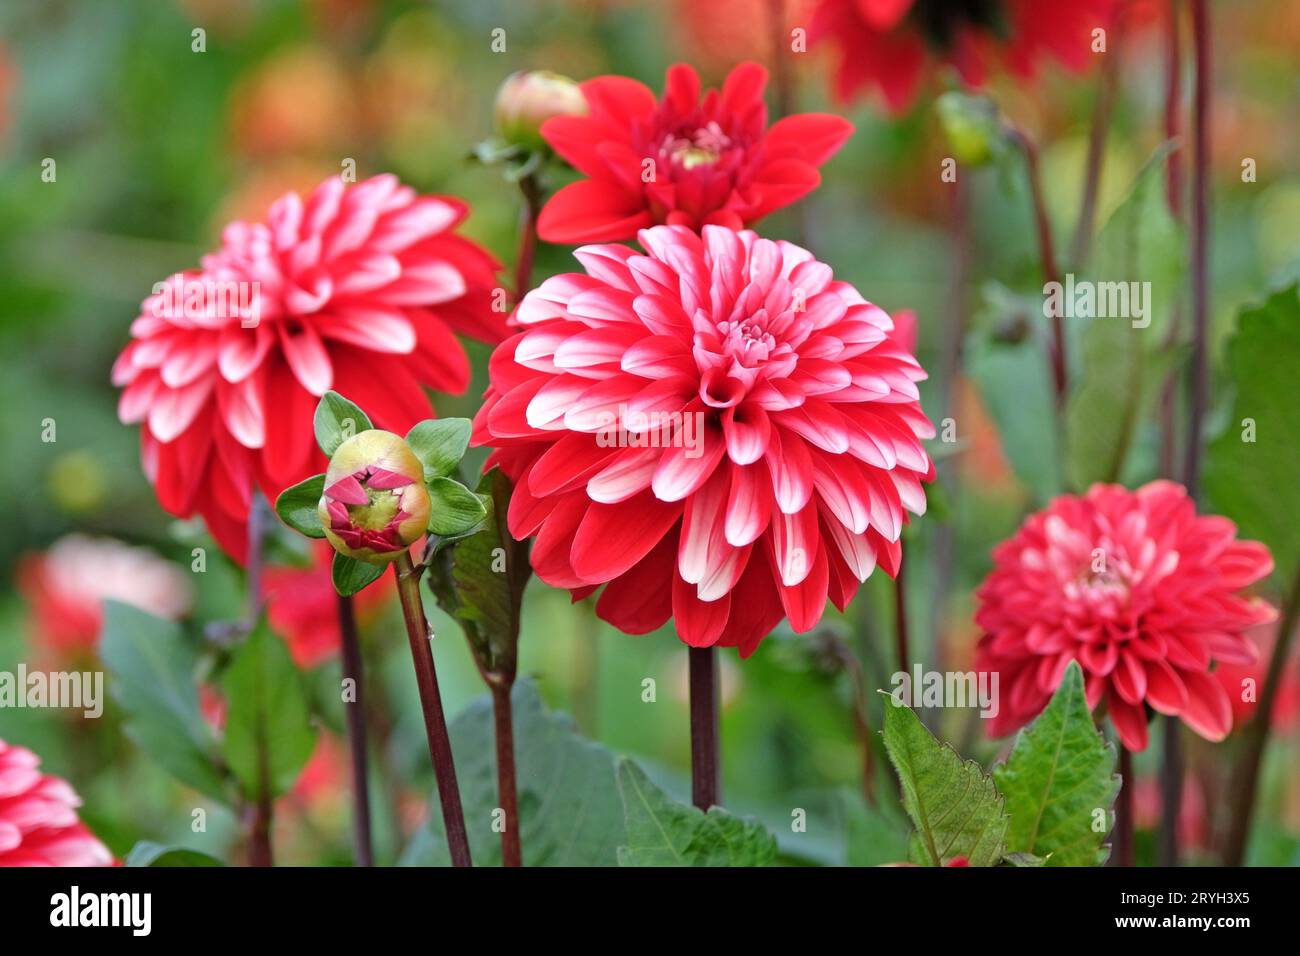 Red and white semi double decorative dahlia 'Pacific Time' in flower. Stock Photo